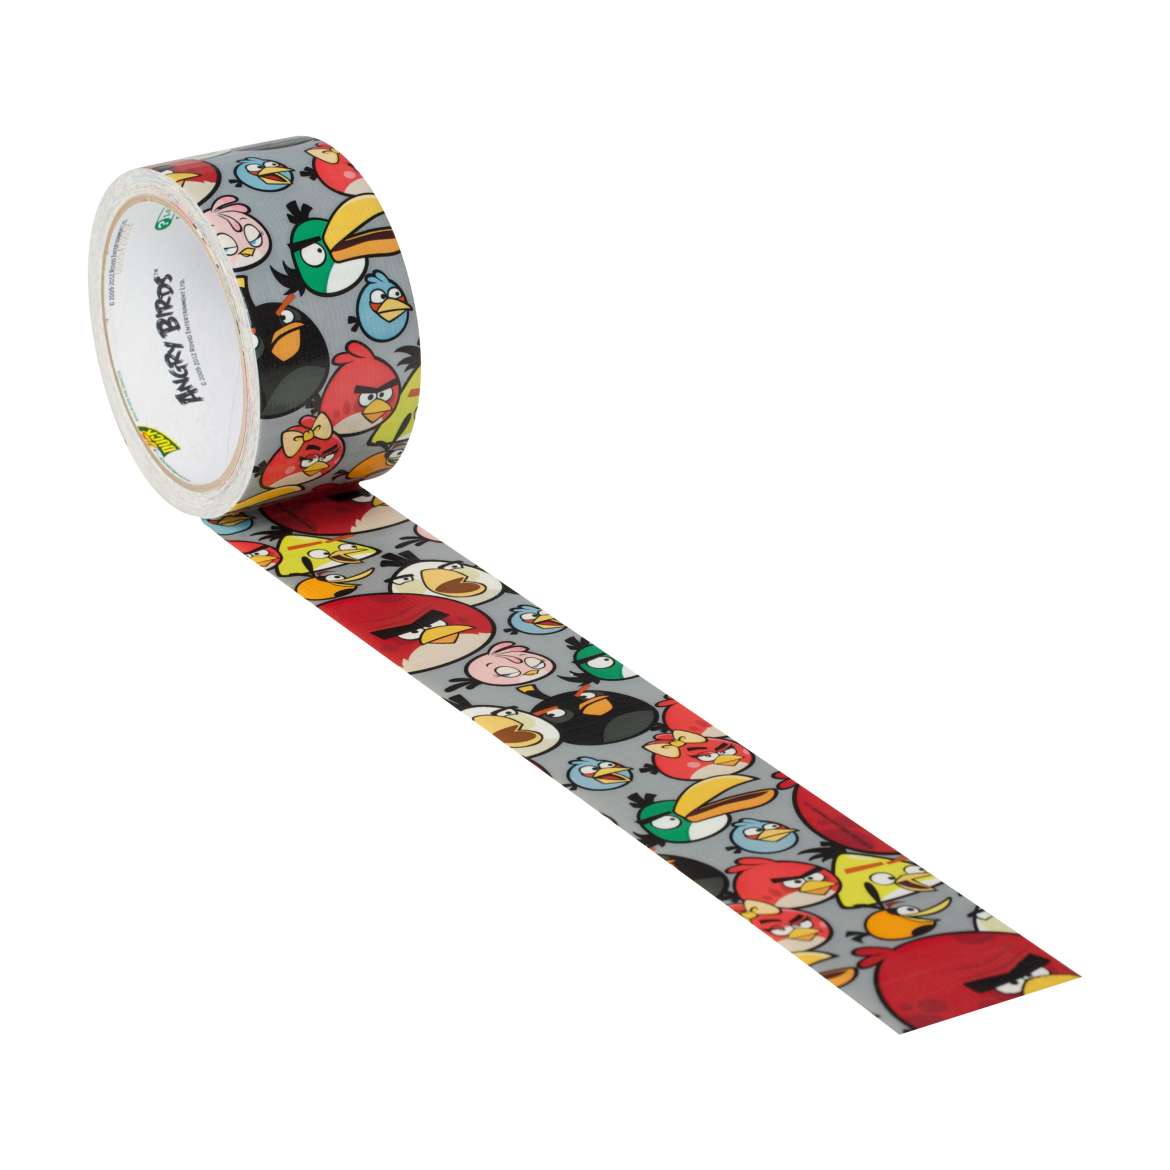 Duck Brand 281512 Angry Birds Printed Duct Tape, 1.88 Inches x 10 Yards, Single Roll - image 3 of 4